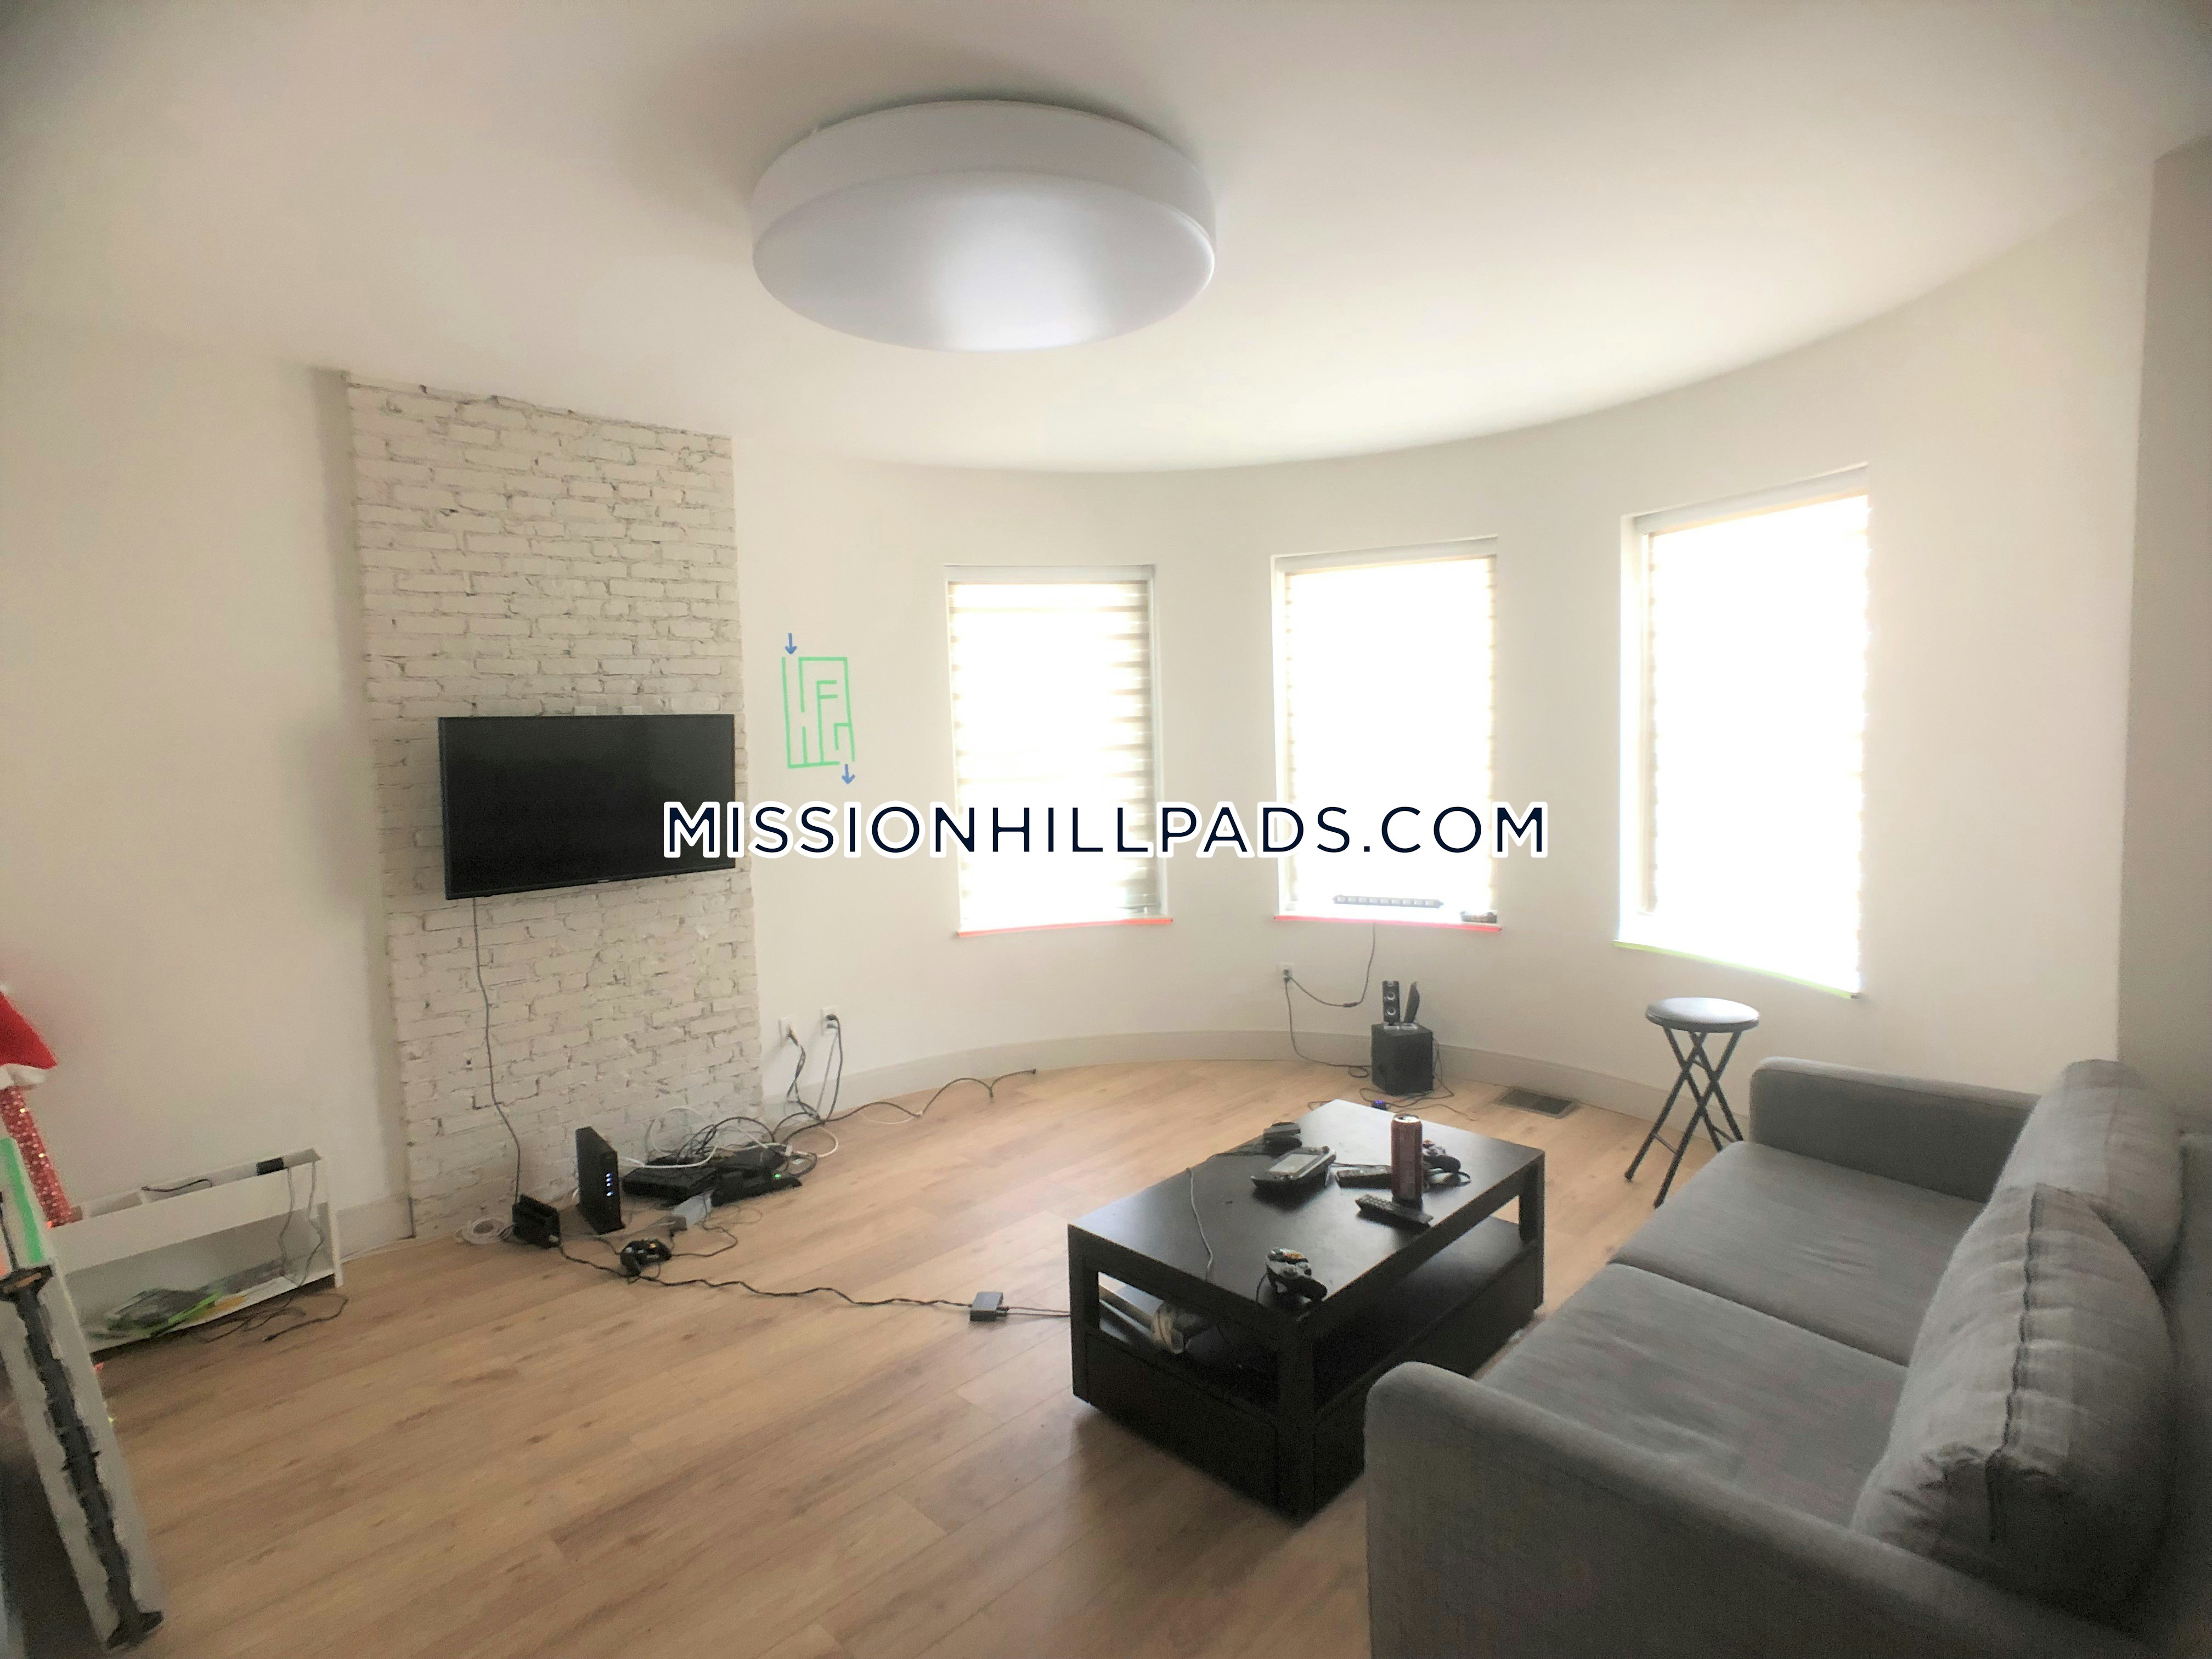 Mission Hill Modern 4 Bedroom Apartment On Mission Hill Boston 5 000